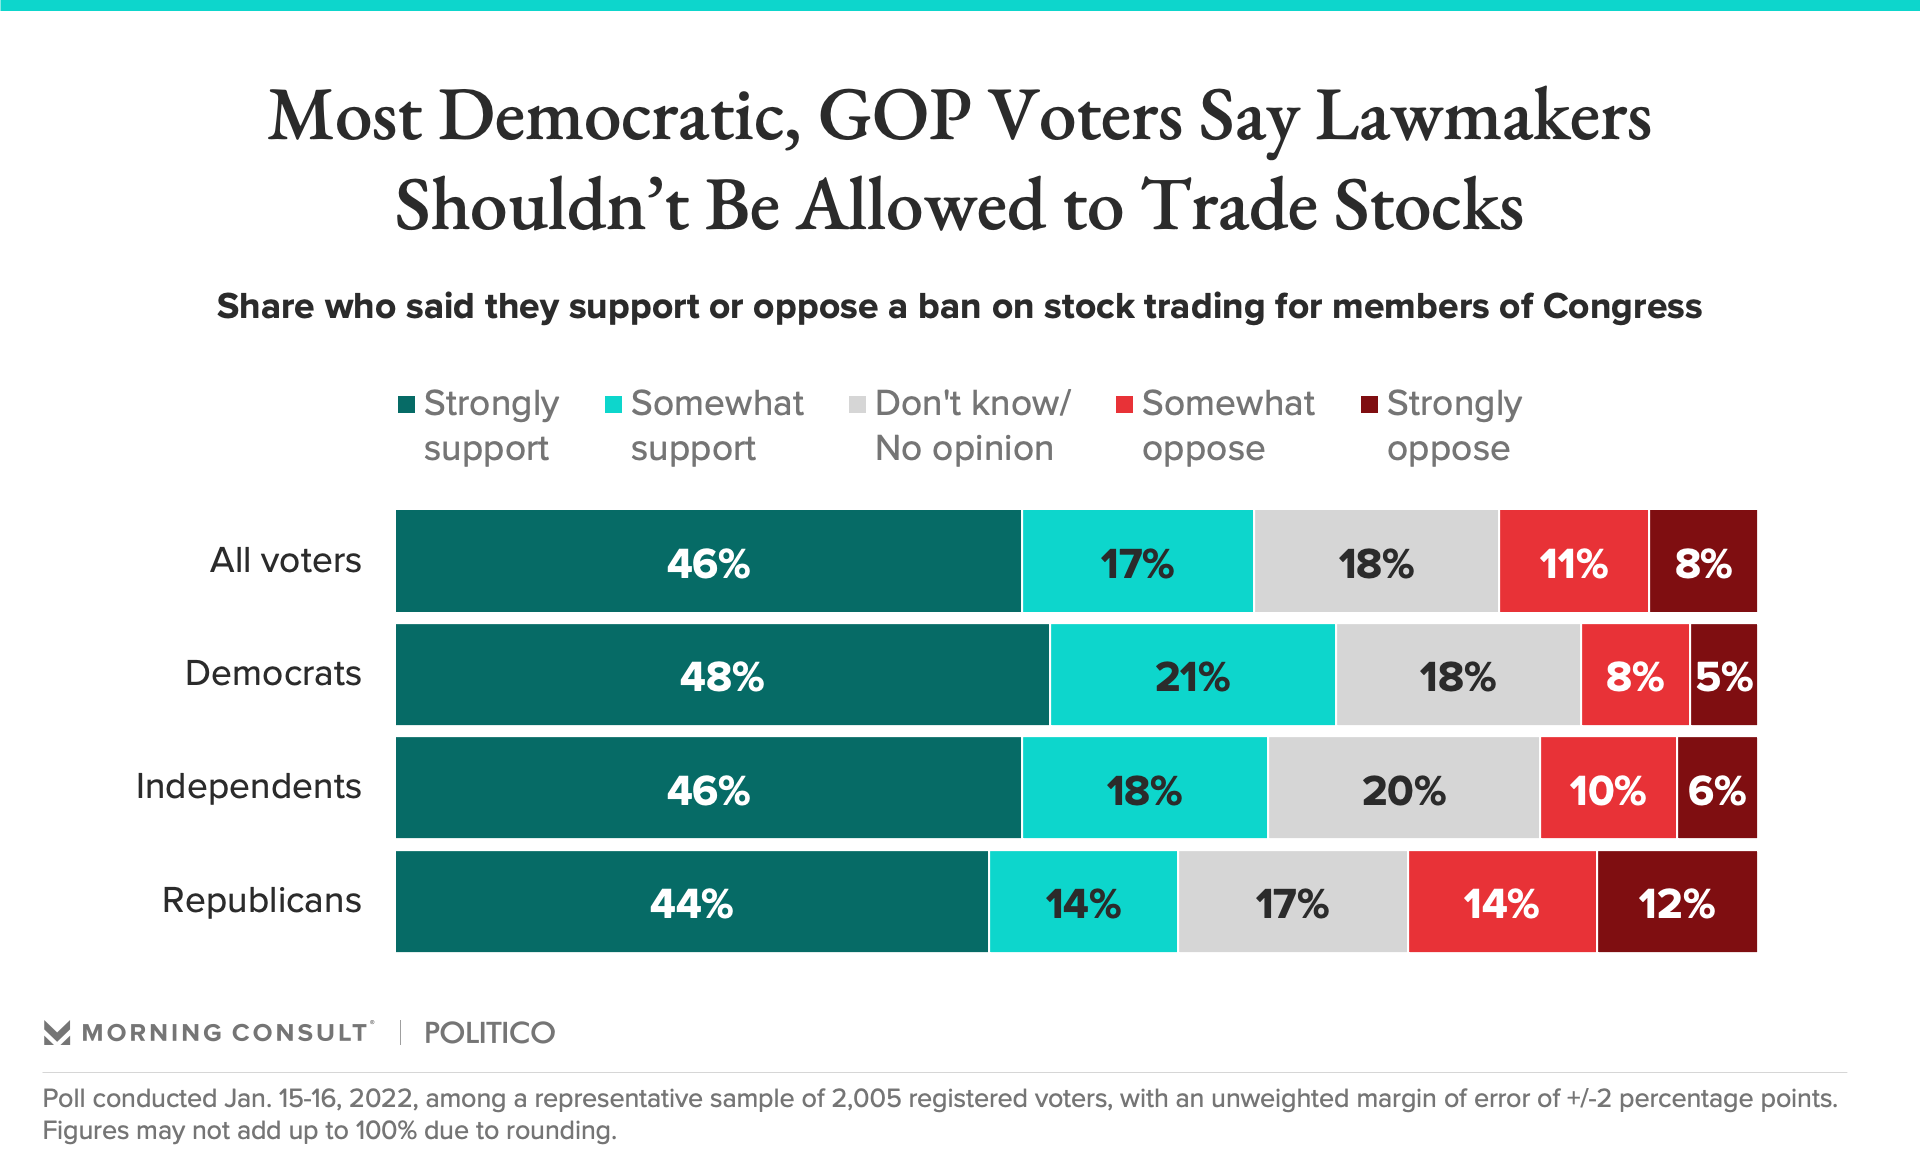 Most Voters of All Parties Support Congressional Stock Trading Restrictions